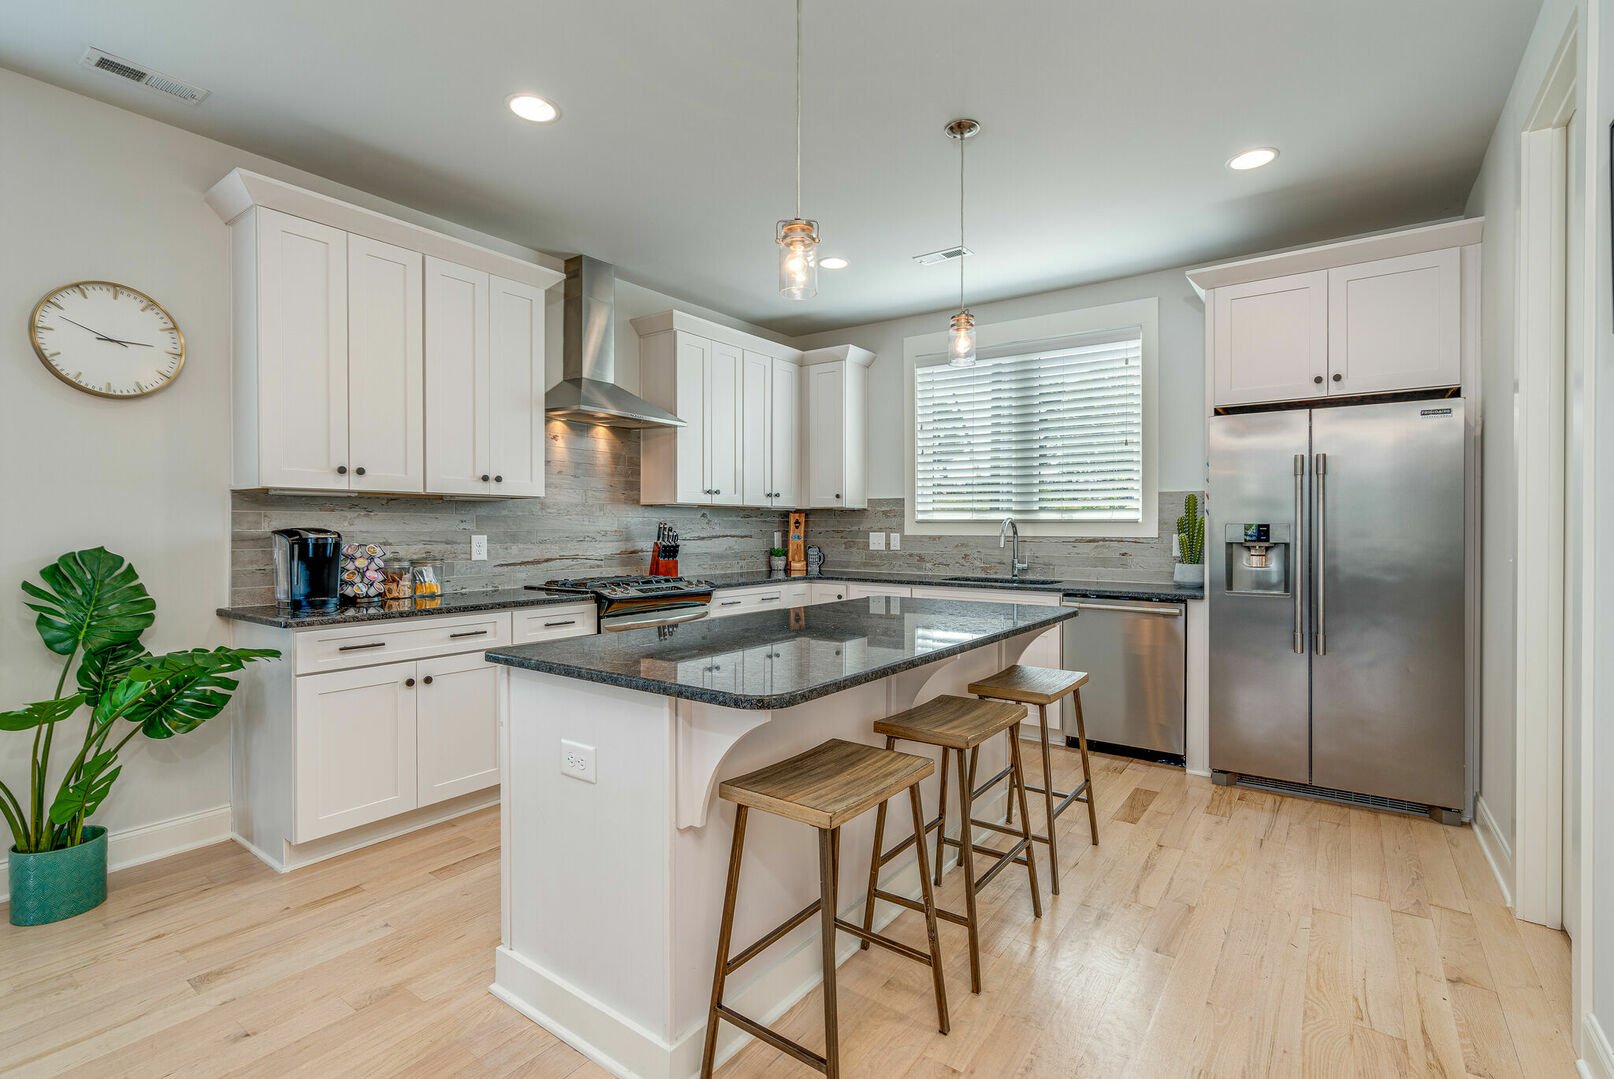 Gourmet kitchen with stainless steel appliances, breakfast bar seating, and is fully stocked with all your basic cooking essentials.